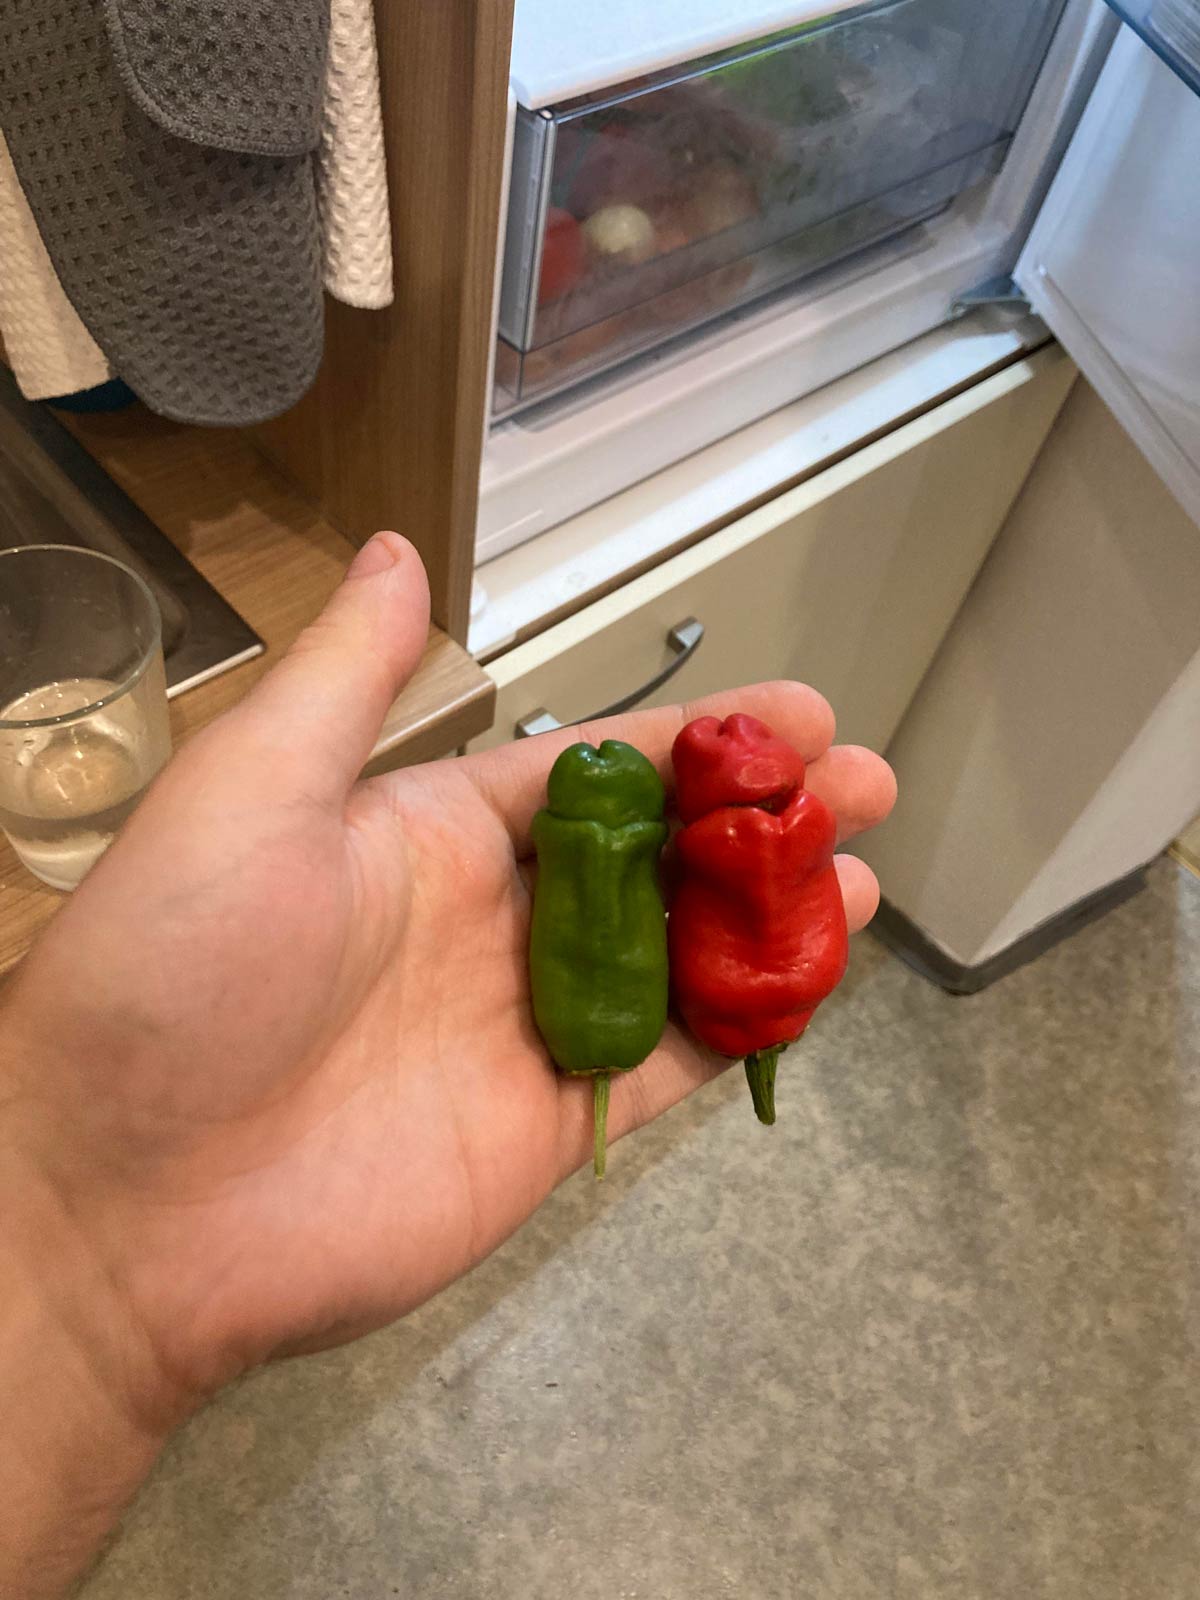 My neighbour showed me her new chili harvest - they're called Peter Peppers